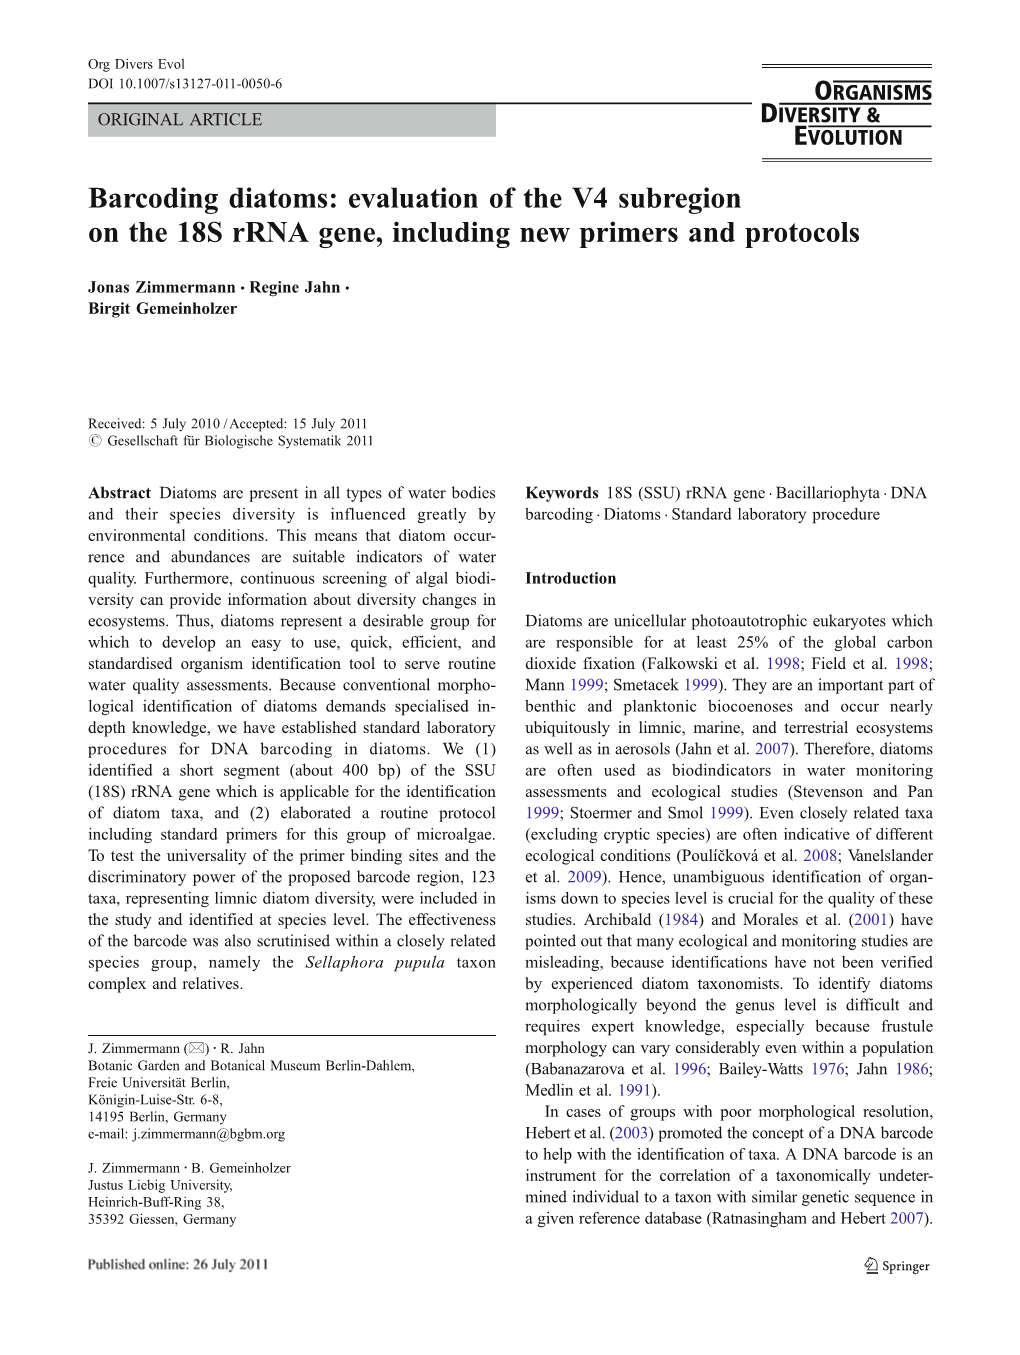 Barcoding Diatoms: Evaluation of the V4 Subregion on the 18S Rrna Gene, Including New Primers and Protocols